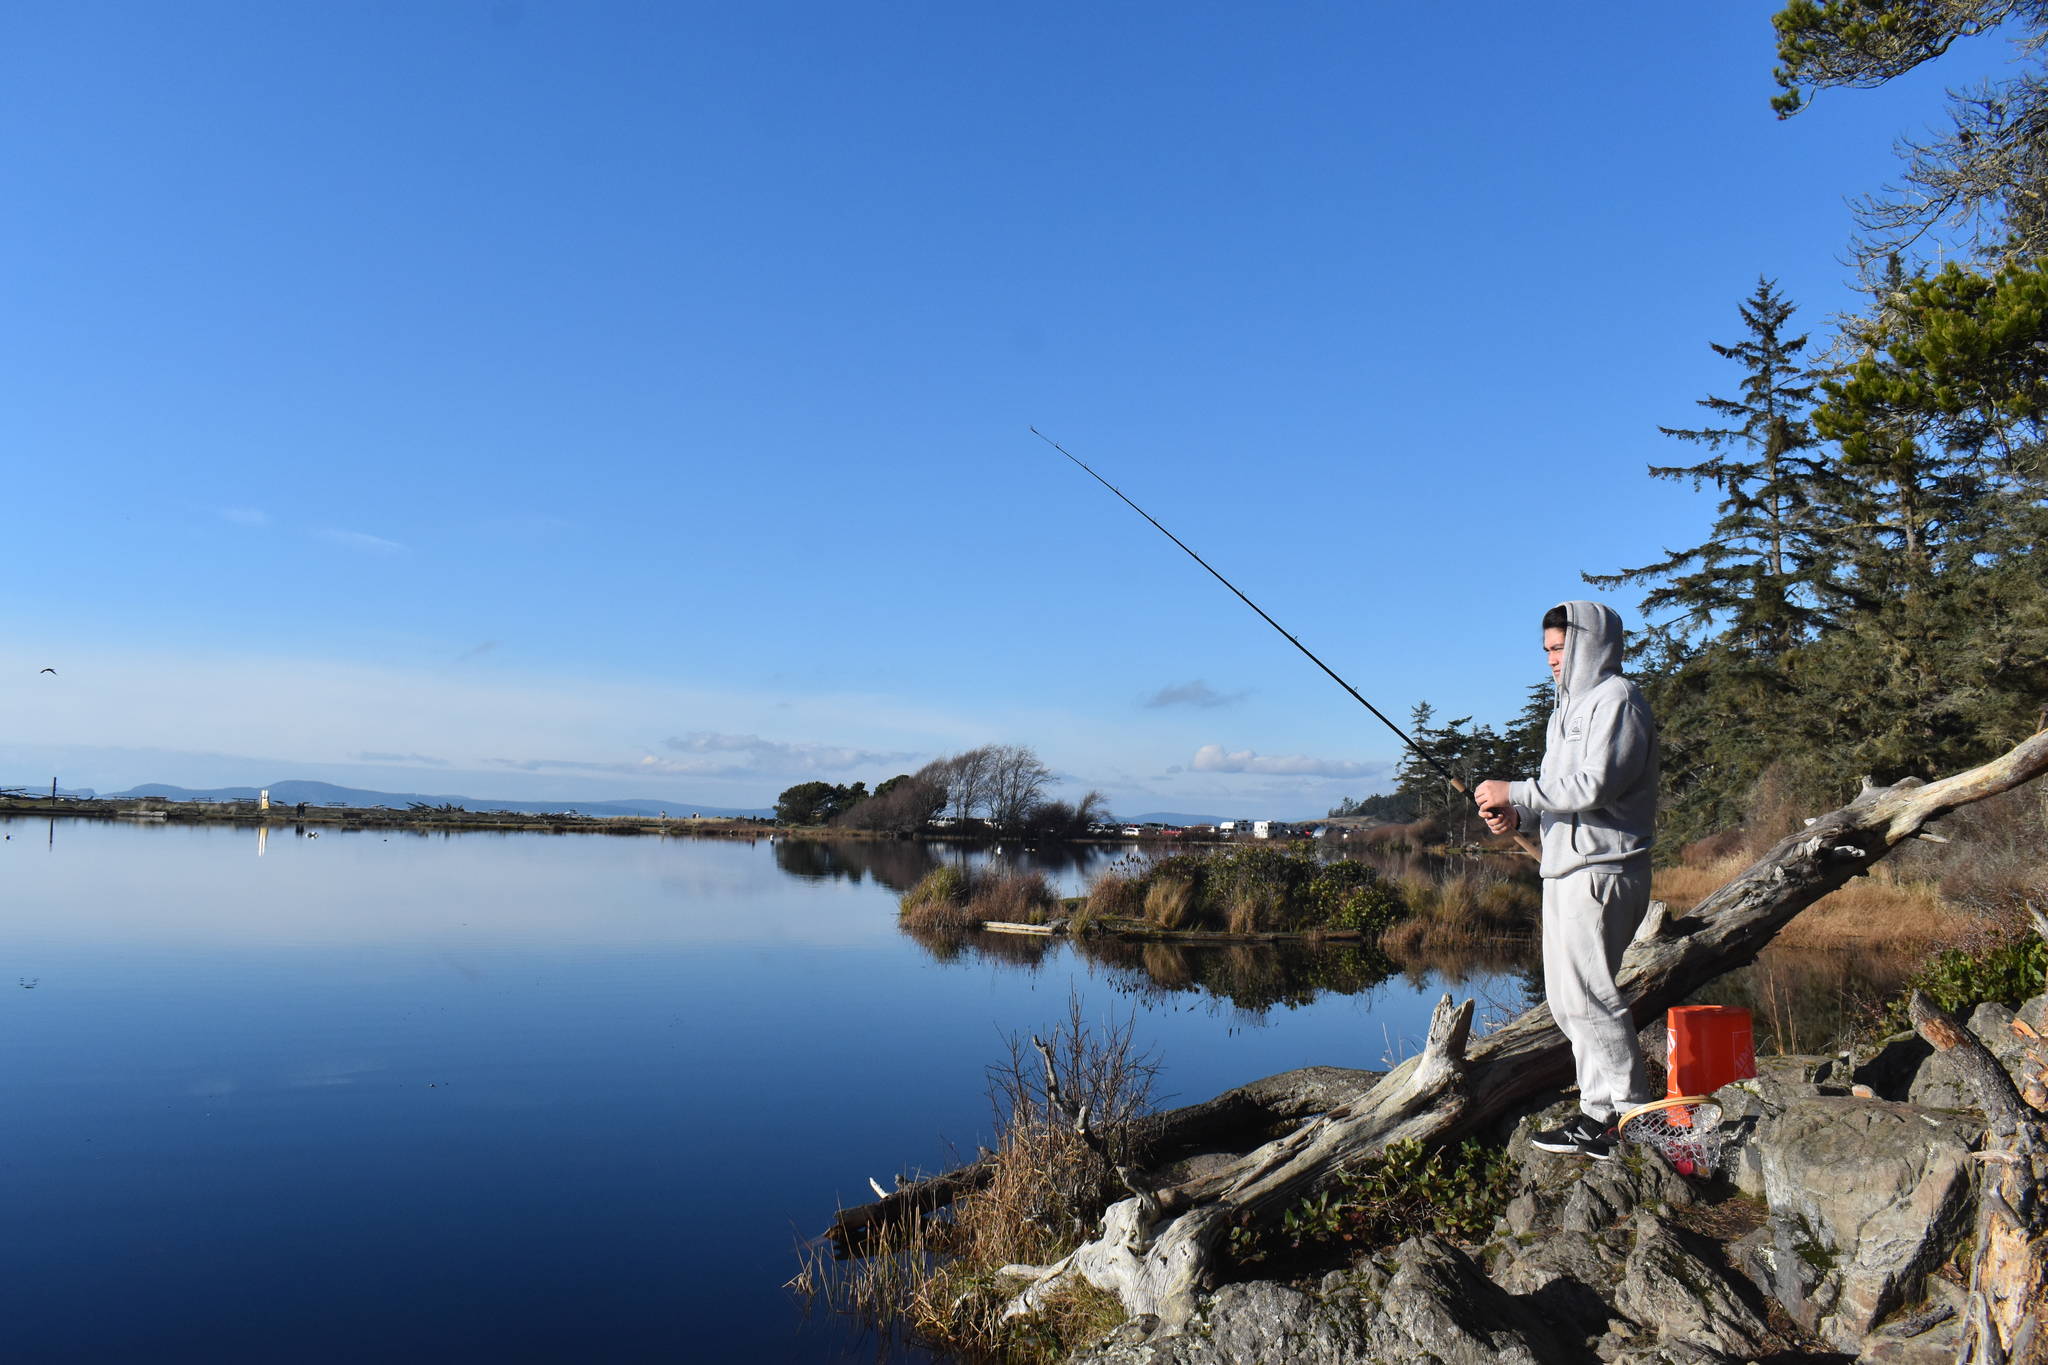 Aiden Santos of Anacortes went fishing at Cranberry Lake in Deception Pass State Park last Saturday. The state park would be used as a Navy training site along with 27 others under a new 5-year proposal.